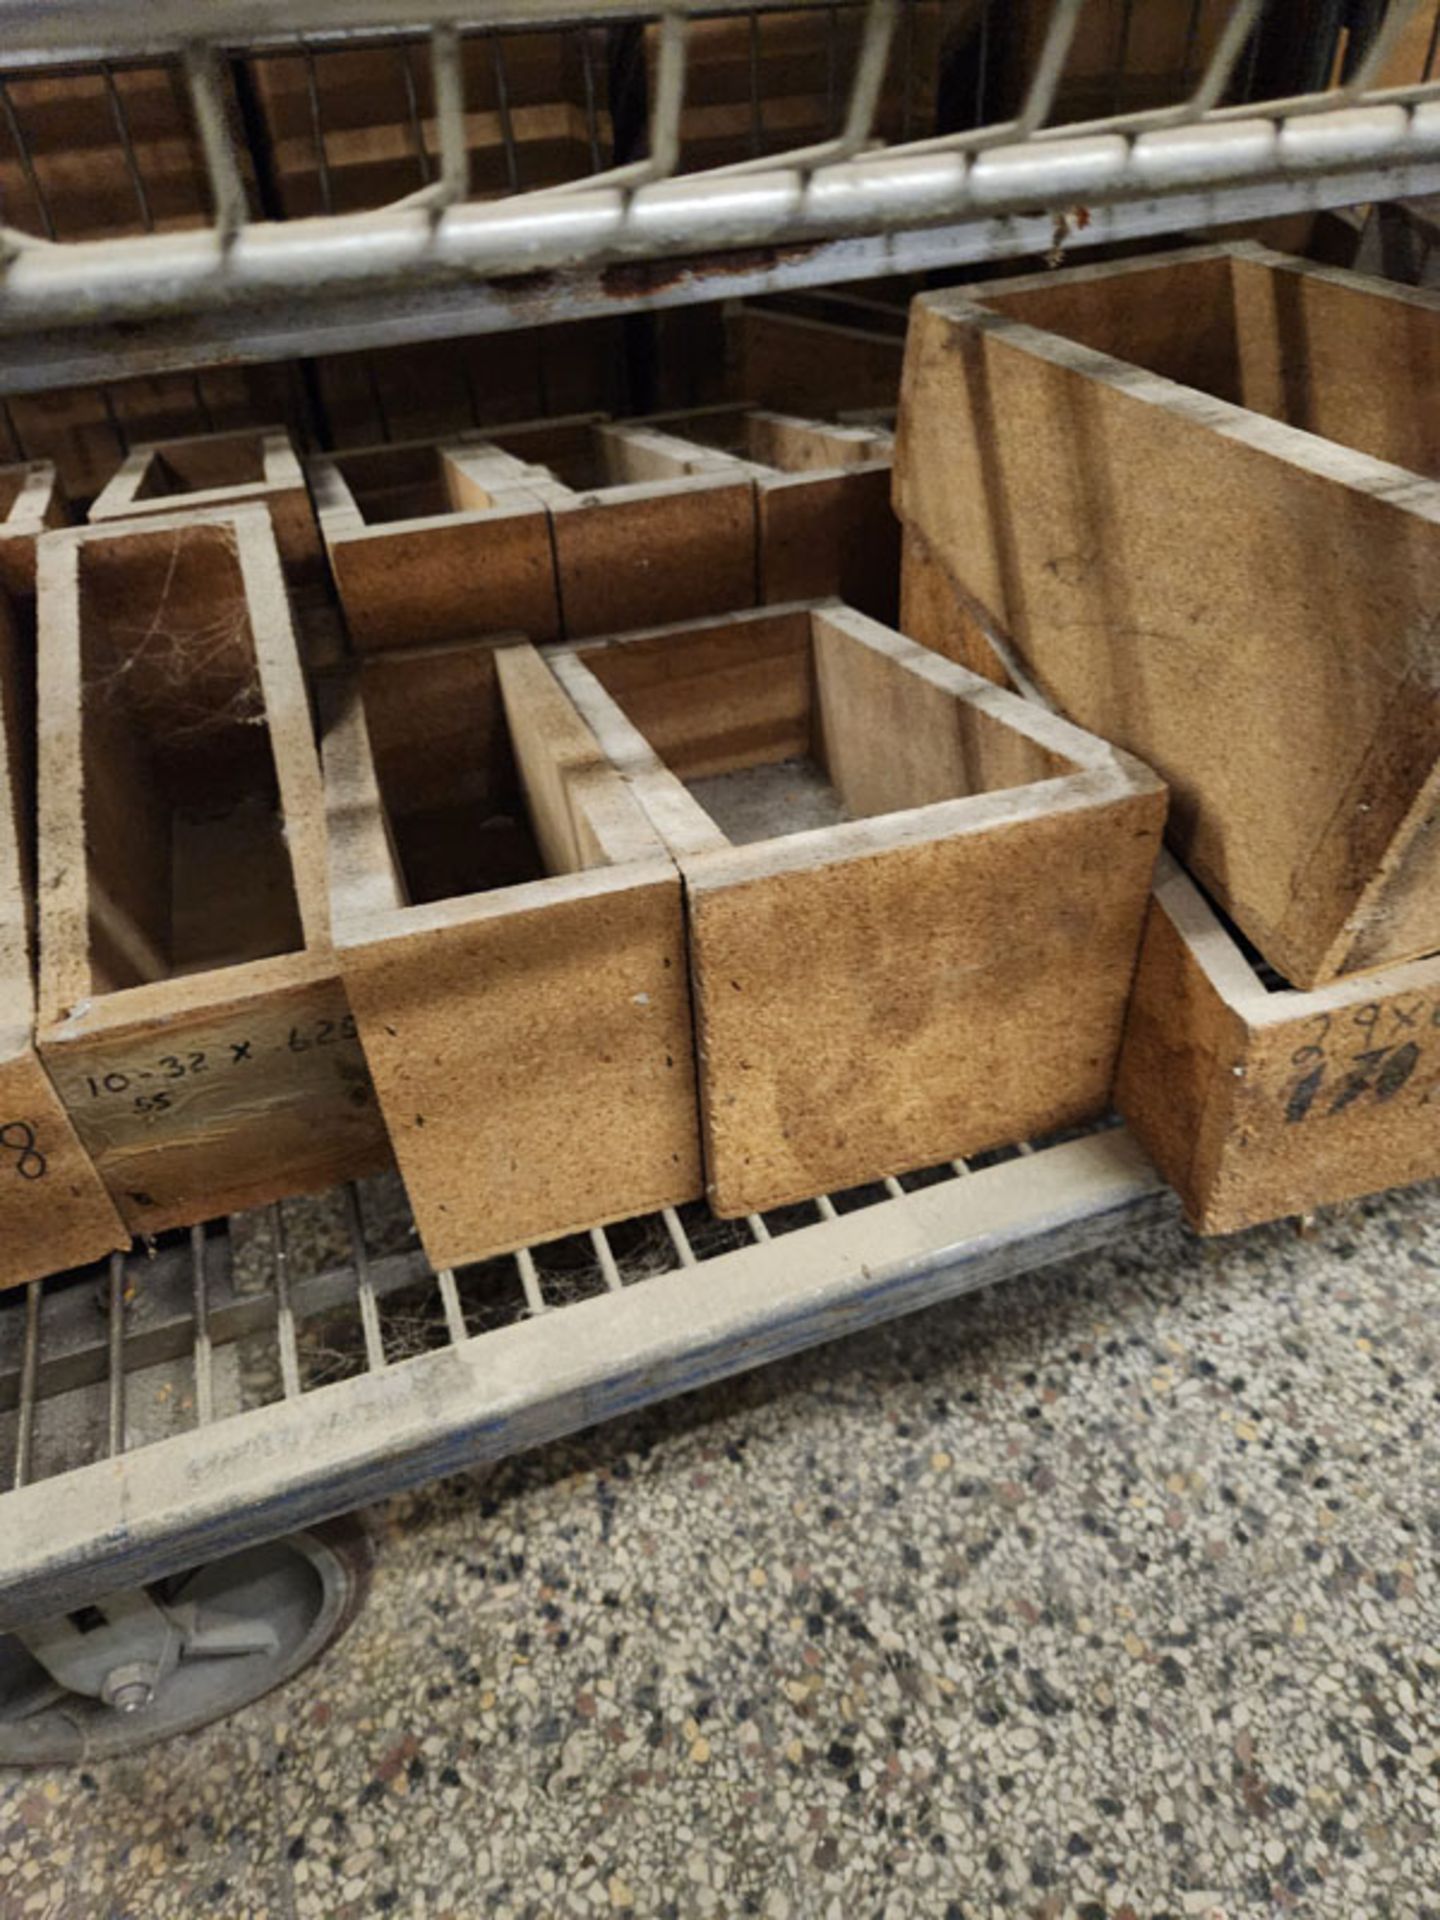 LOT OF 15 WOOD PARTS BOXES - Image 3 of 4